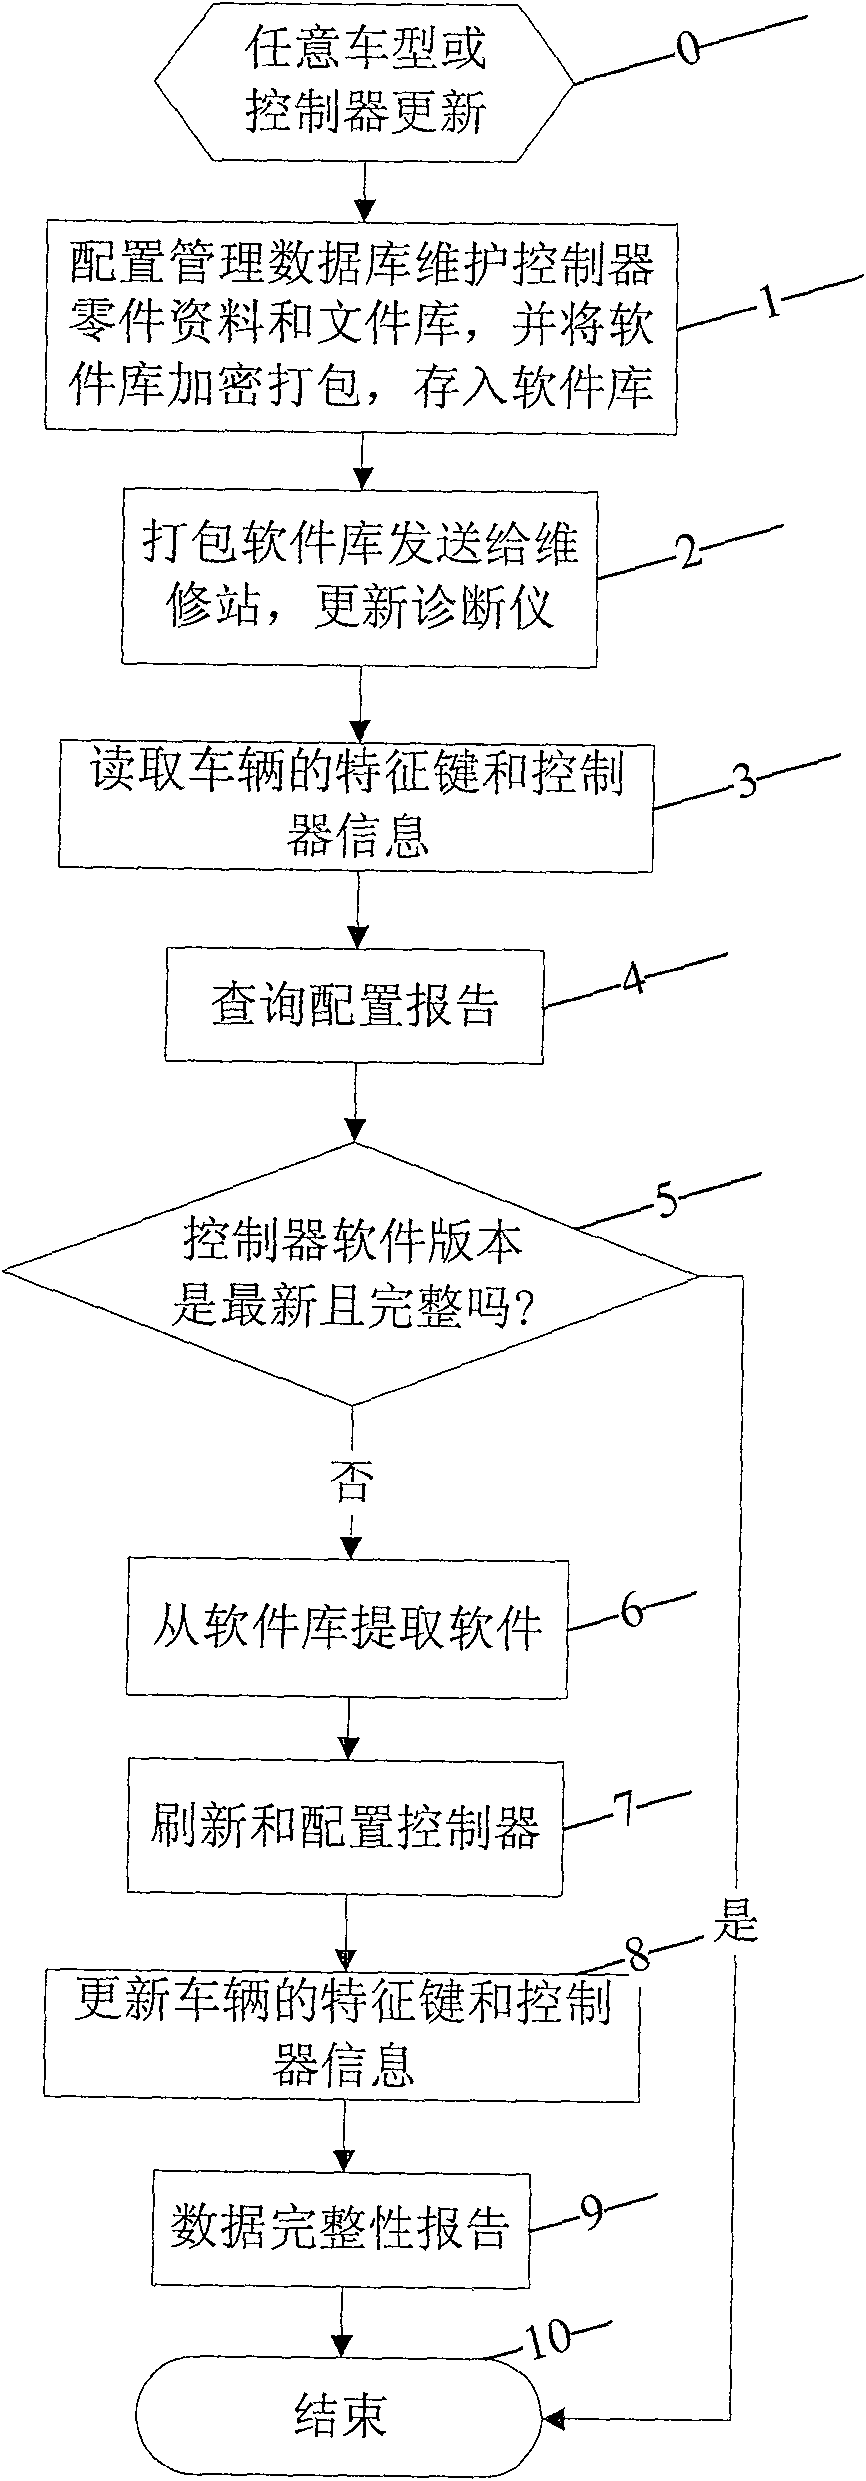 Vehicle diagnostic device calibration software configuration administrative system and method